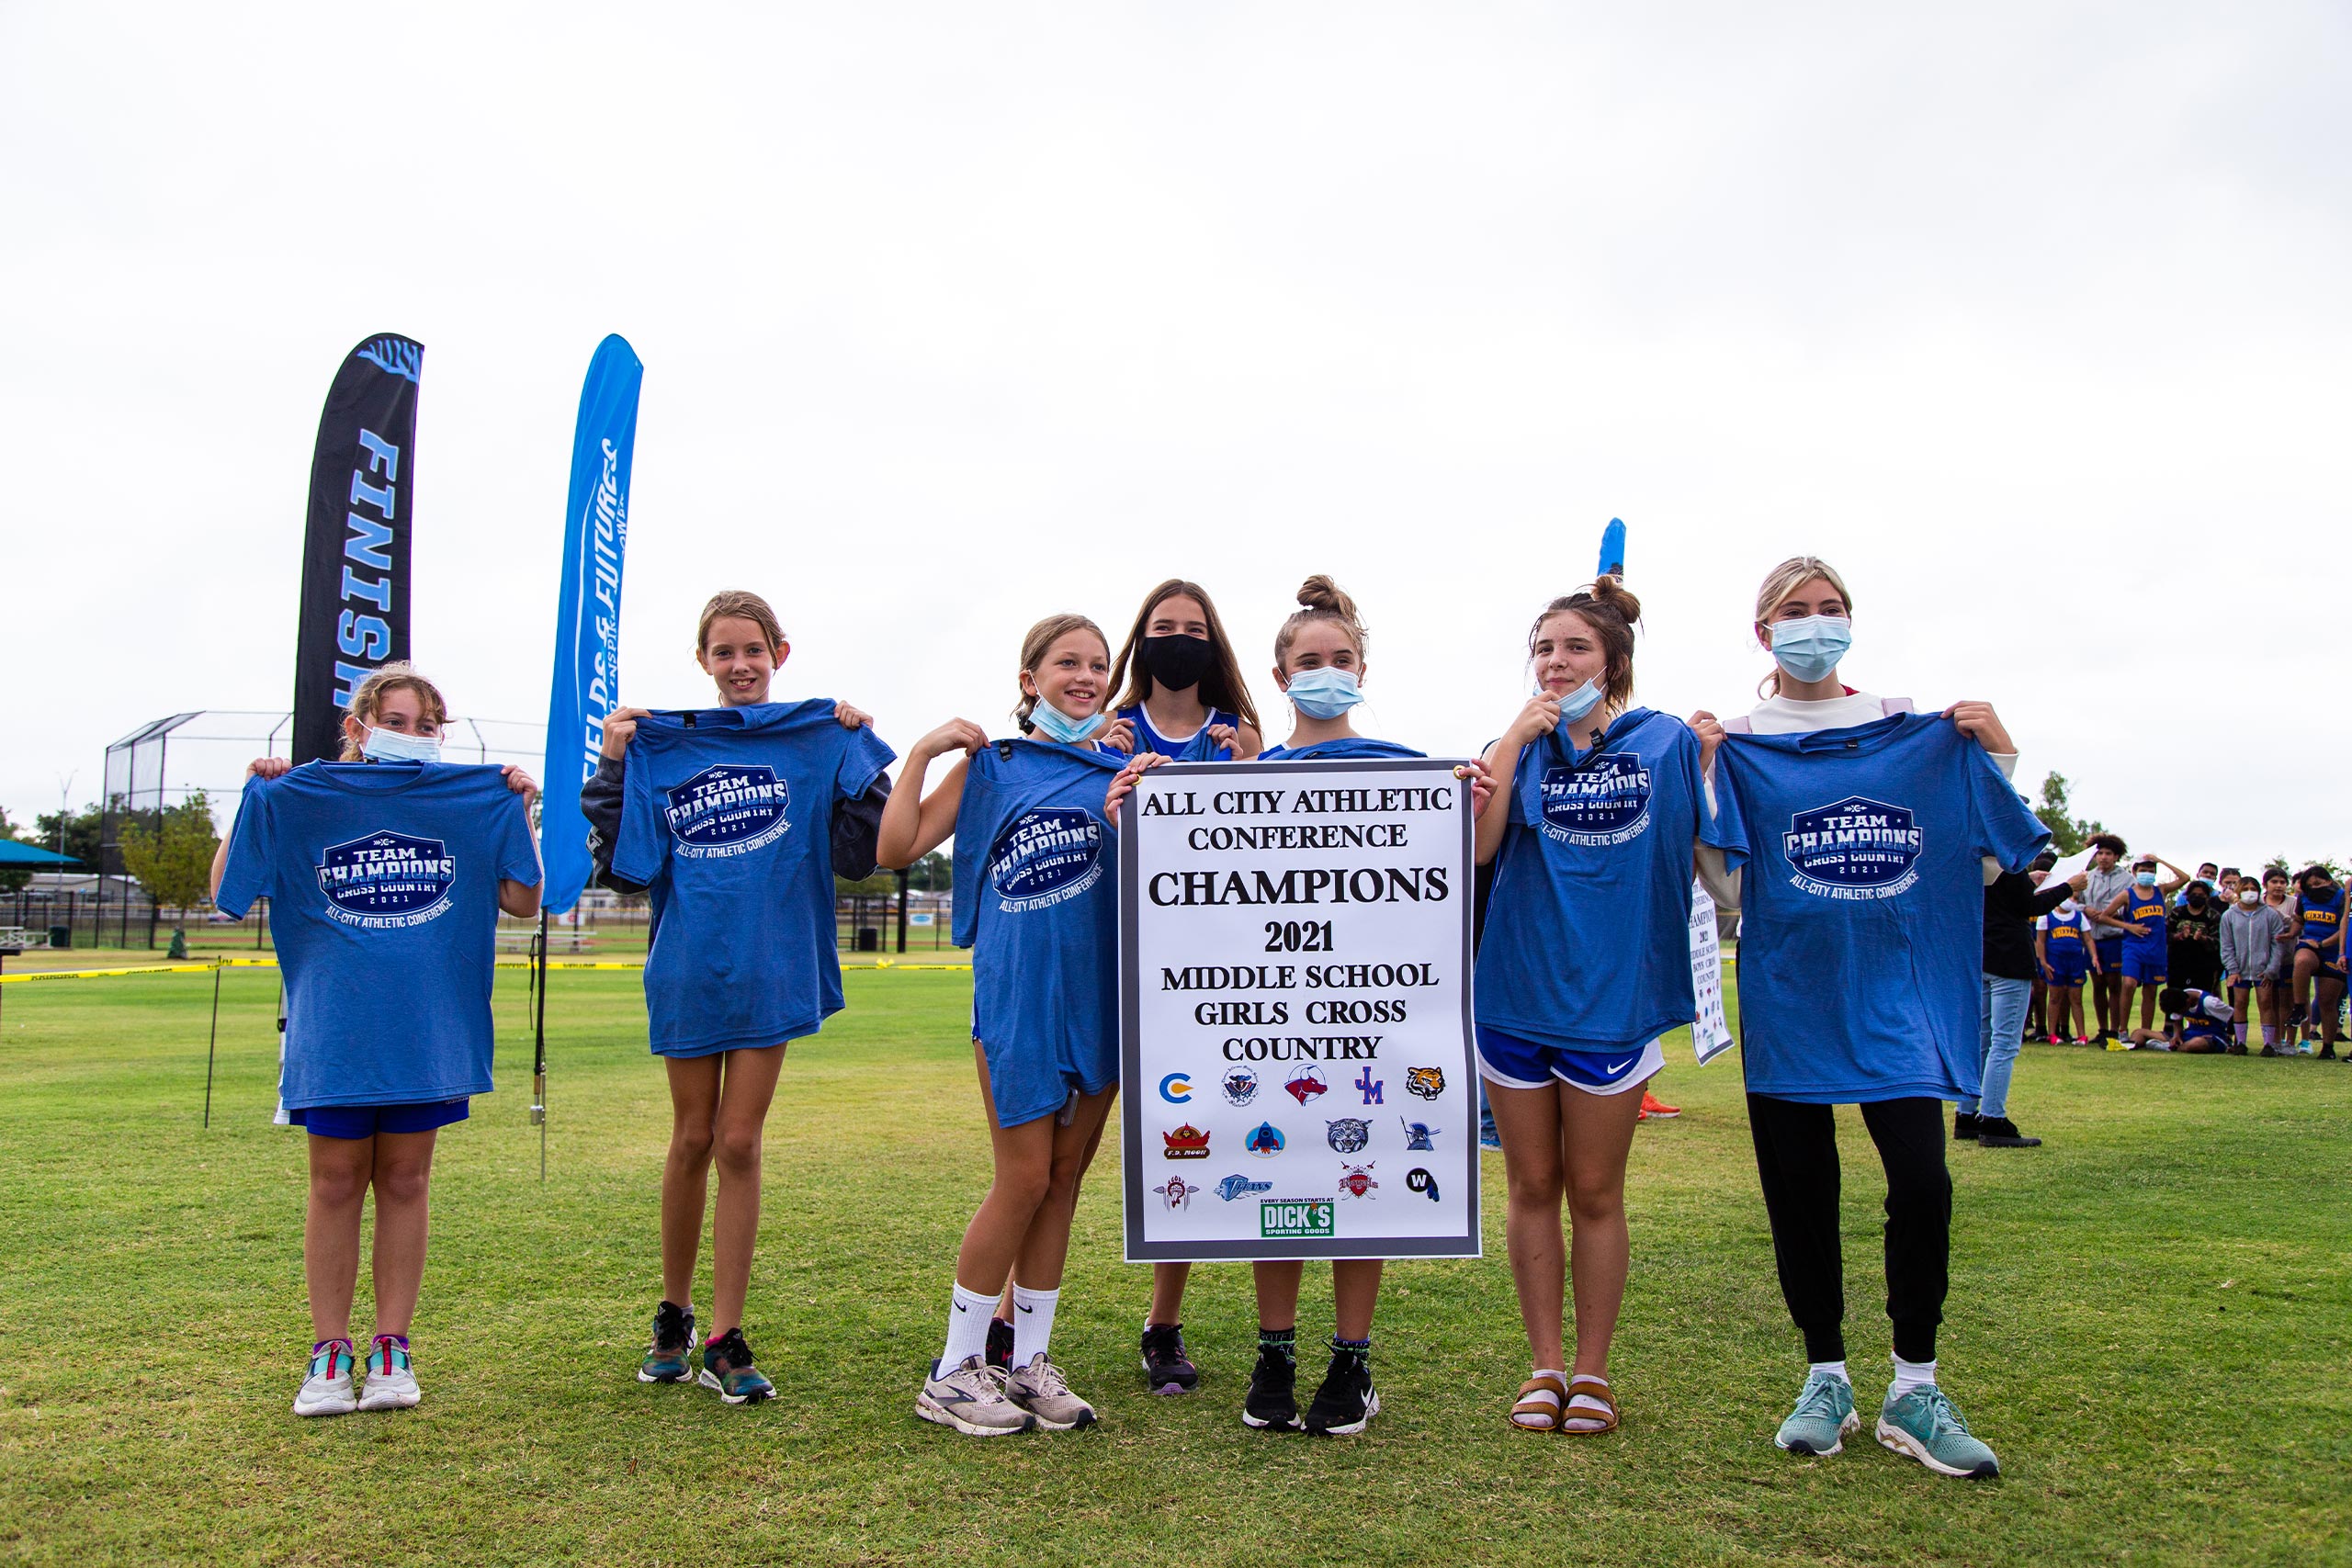 Athletic Conference Middle School Cross Country Championship blog post gallery image of the Classen SAS Middle School girls team holding the team champions banner and wearing team champions t-shirts